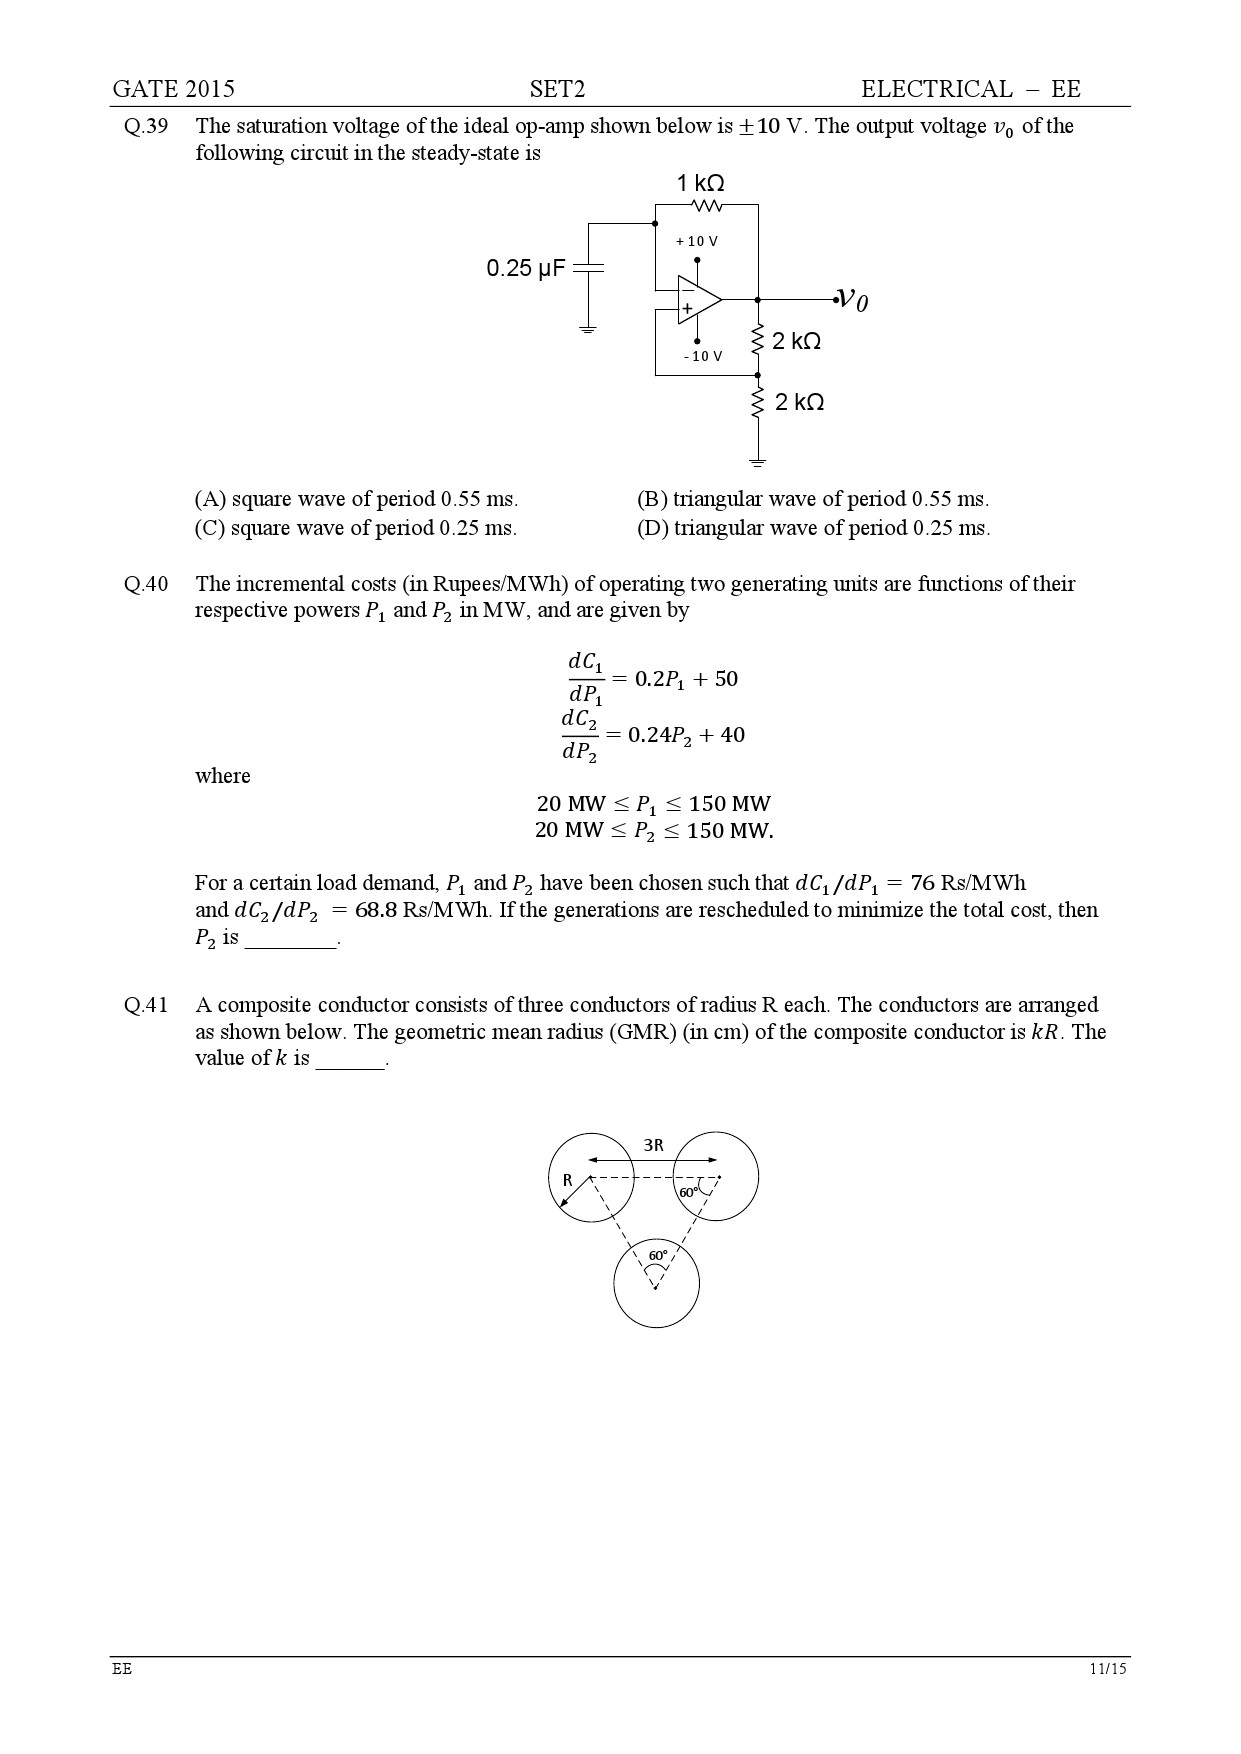 GATE Exam Question Paper 2015 Electrical Engineering Set 2 11